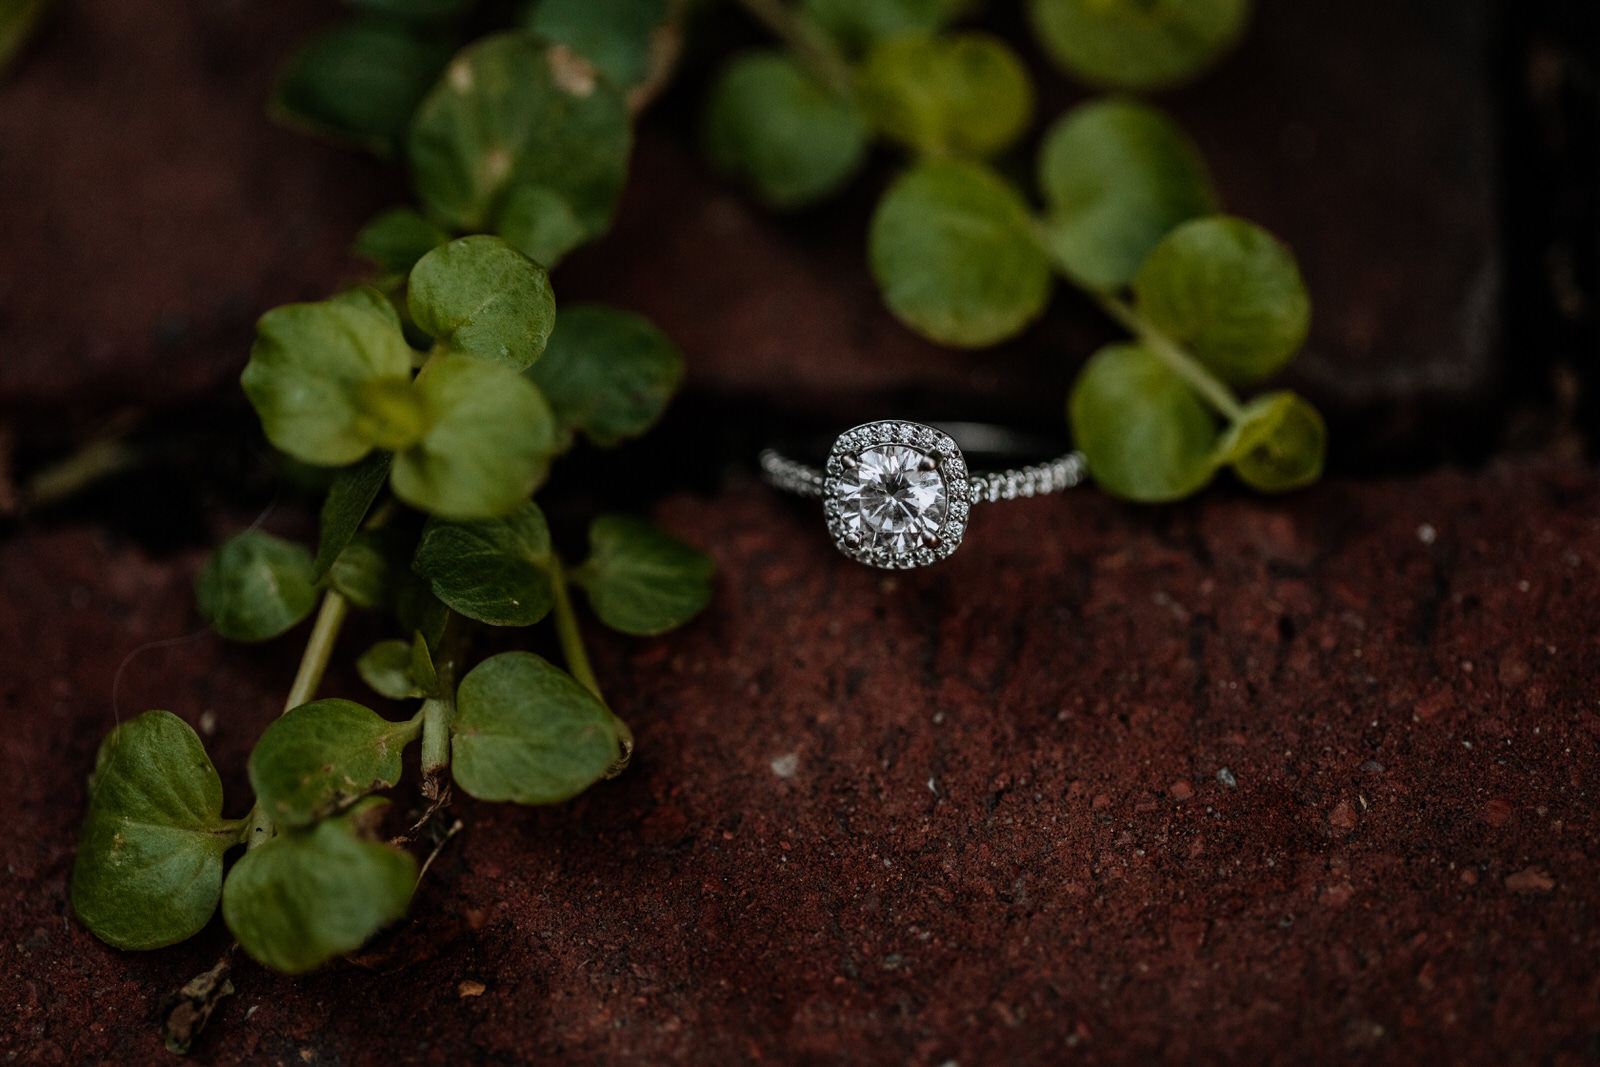 Photograph of an engagement ring in between bricks